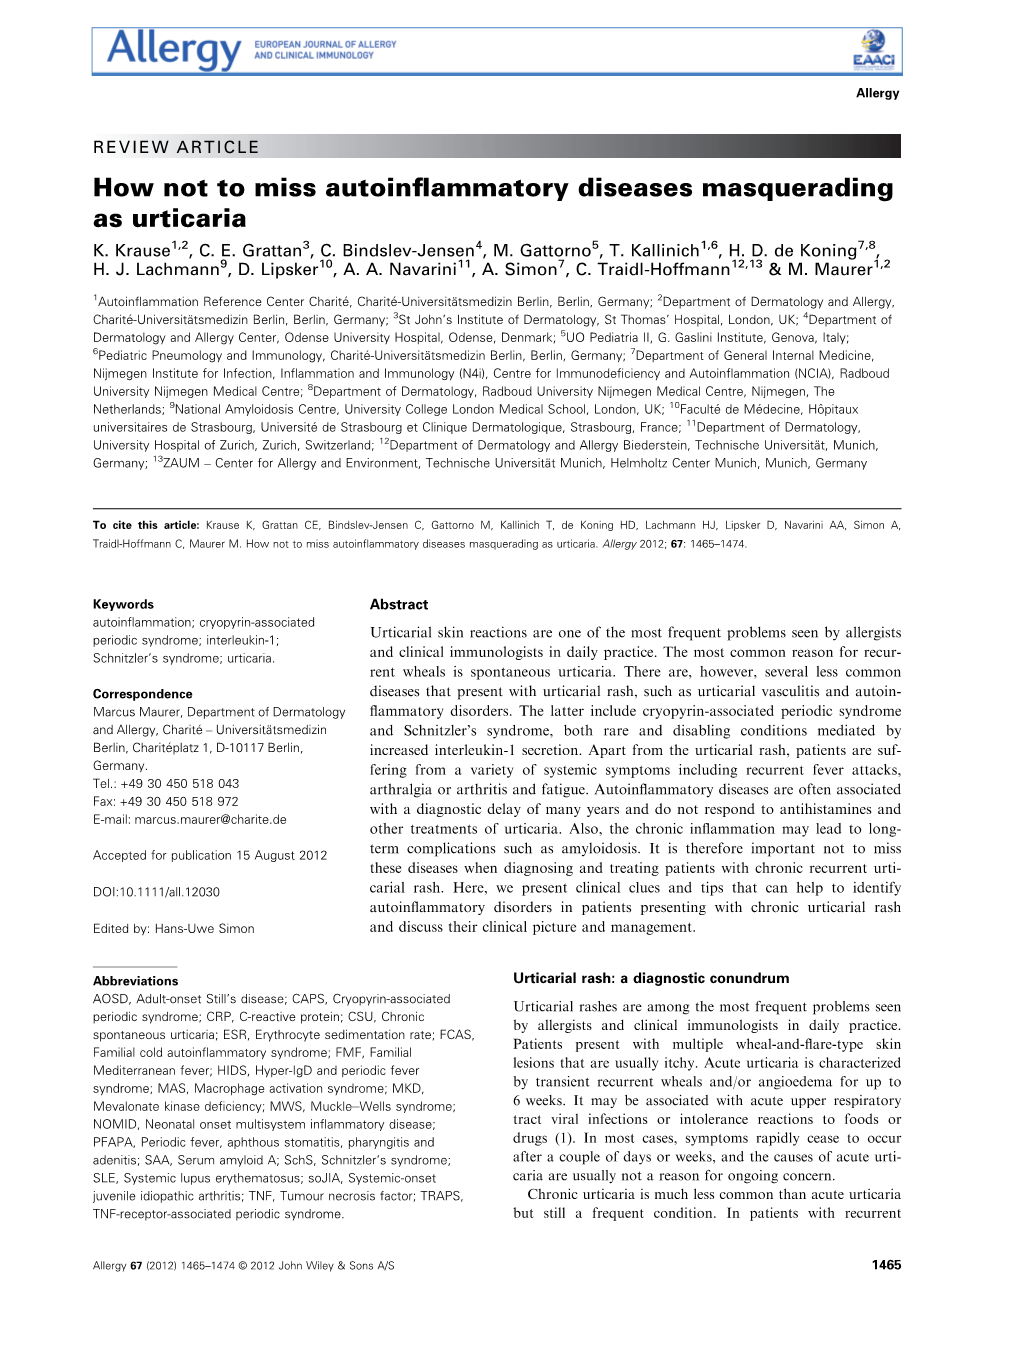 How Not to Miss Autoinflammatory Diseases Masquerading As Urticaria